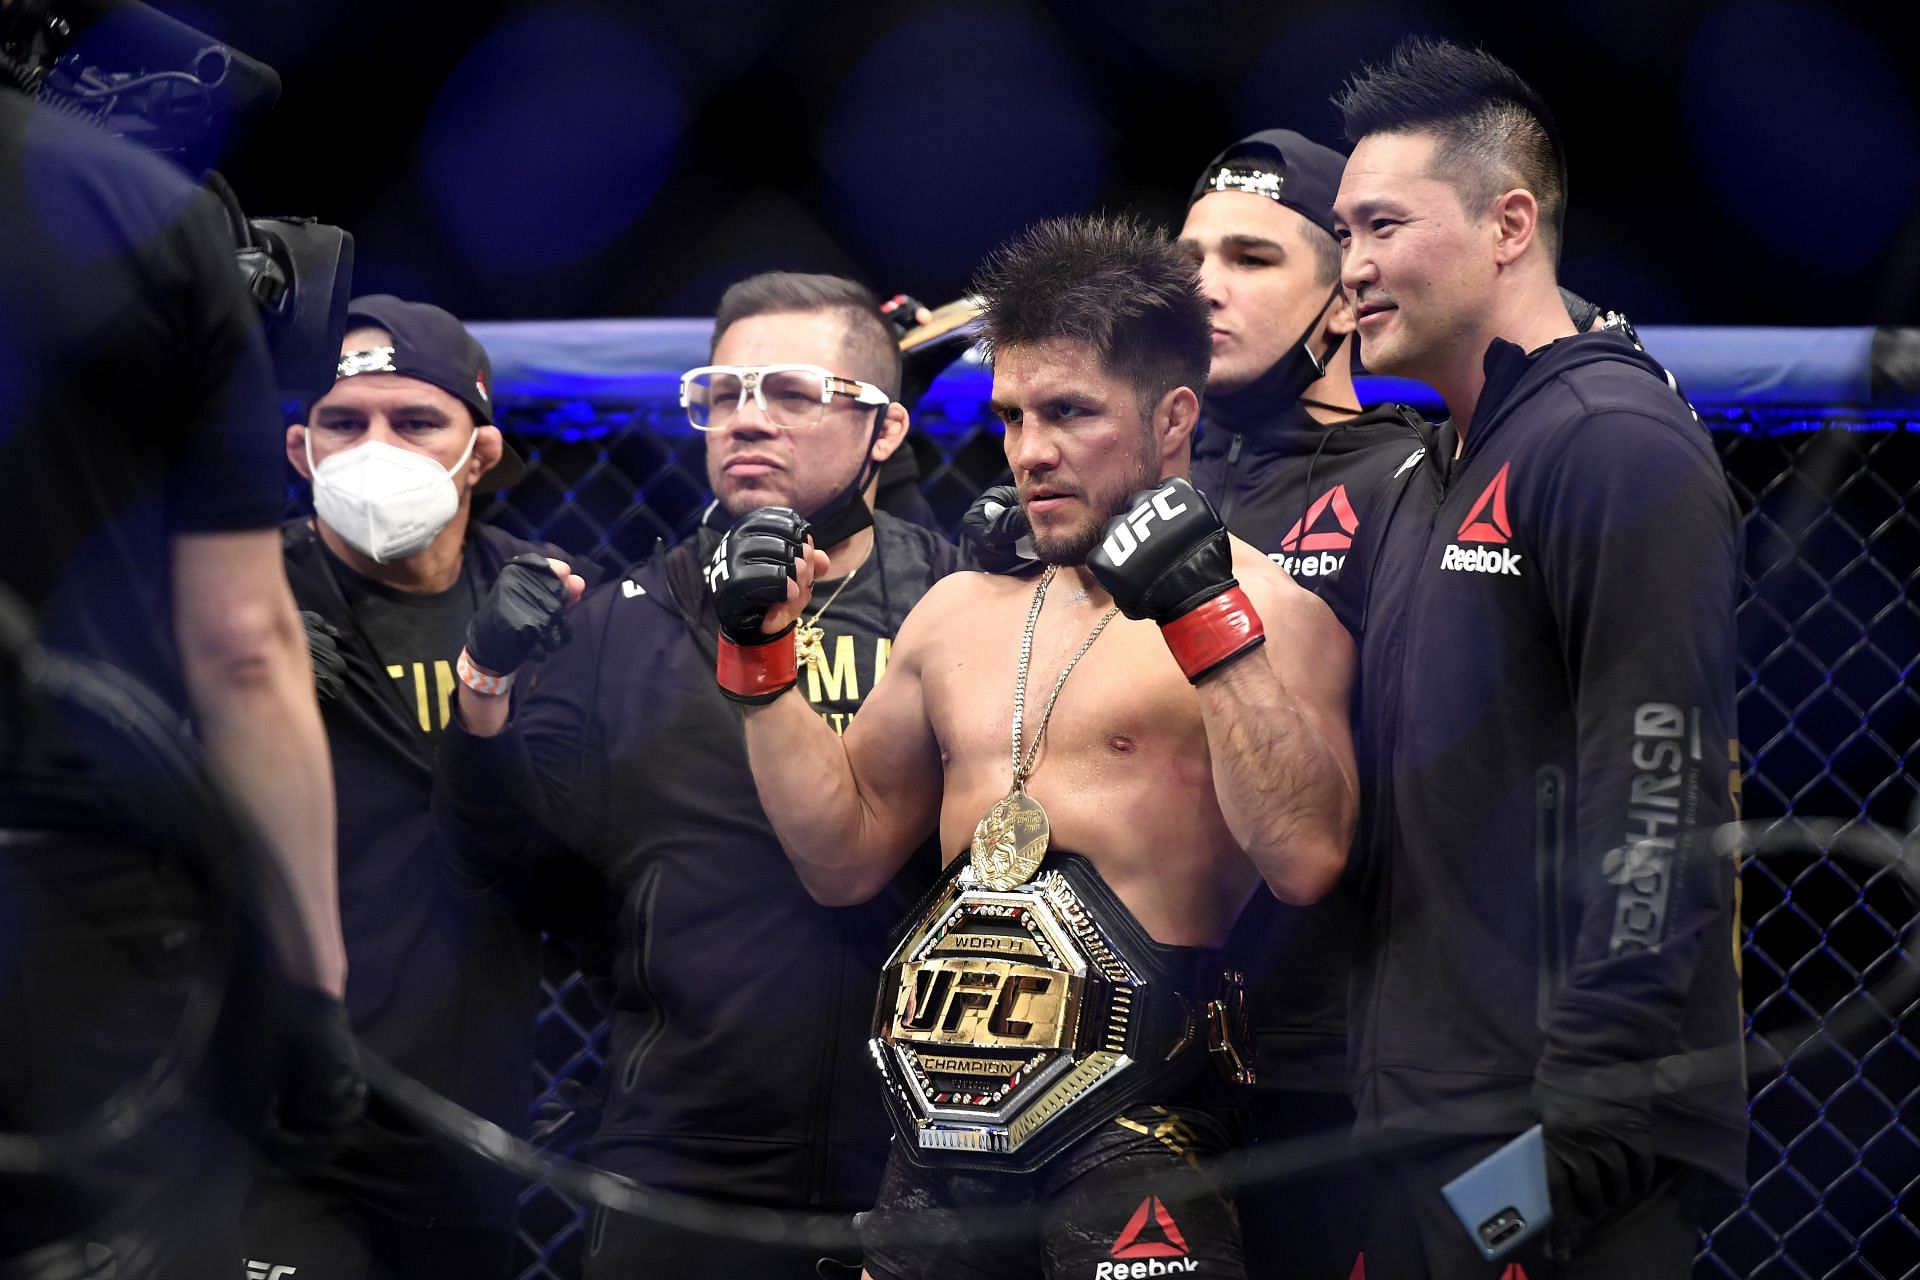 Henry Cejudo may have been on a collision course with &#039;The God of War&#039; had he remained at flyweight